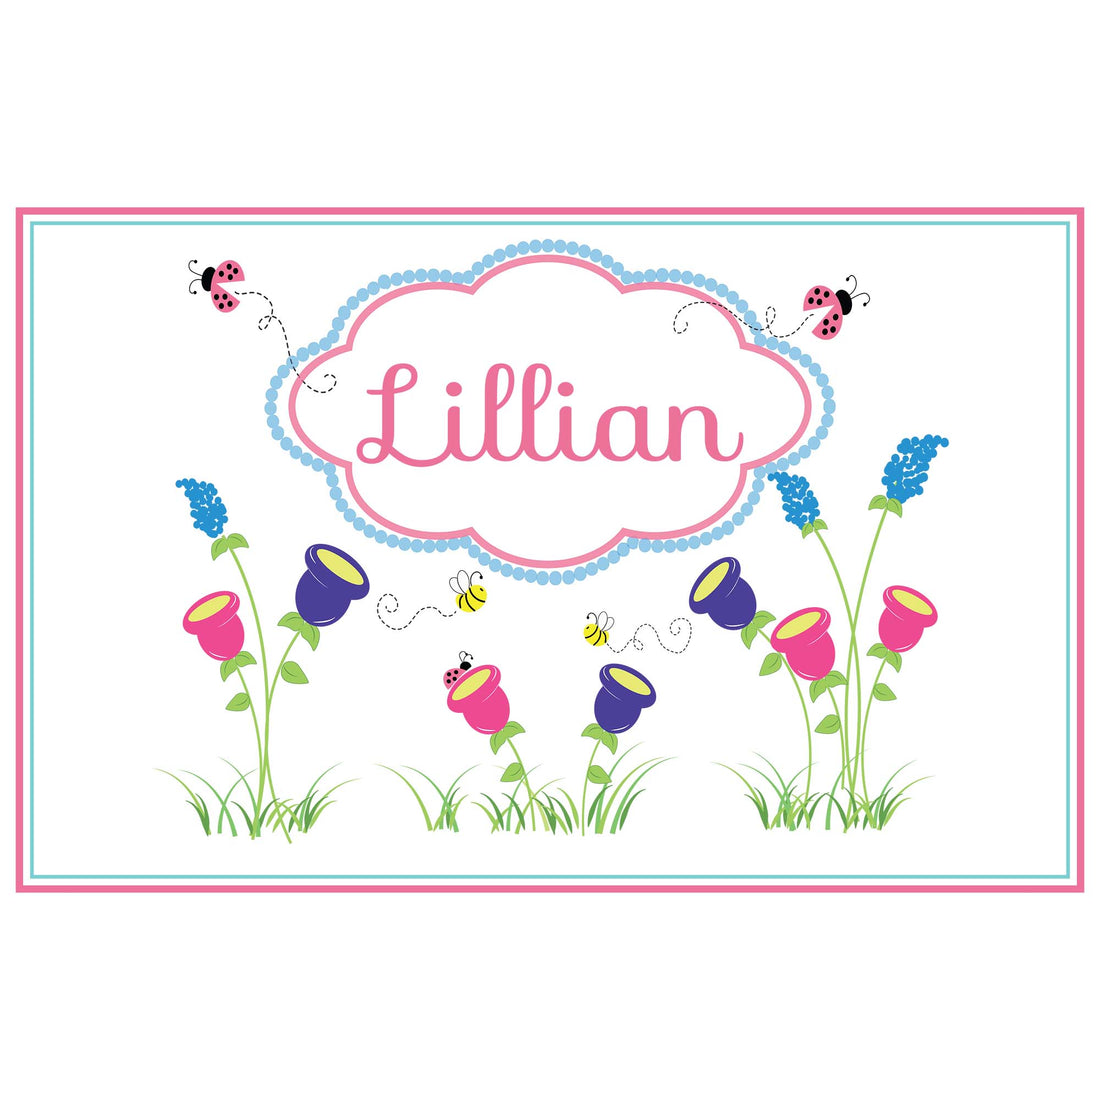 Personalized Placemat with English Garden design